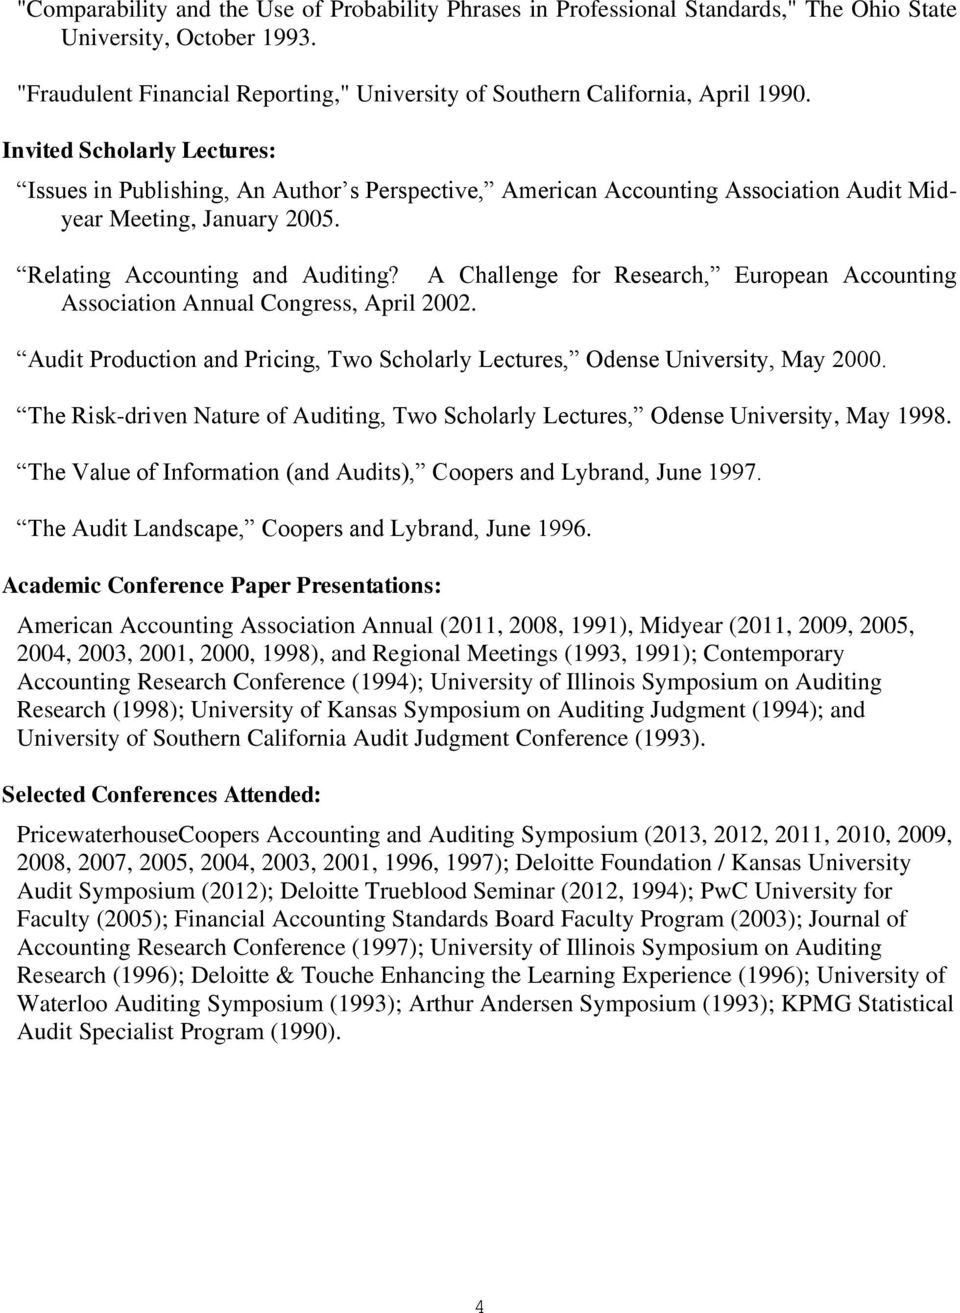 A Challenge for Research, European Accounting Association Annual Congress, April 2002. Audit Production and Pricing, Two Scholarly Lectures, Odense University, May 2000.